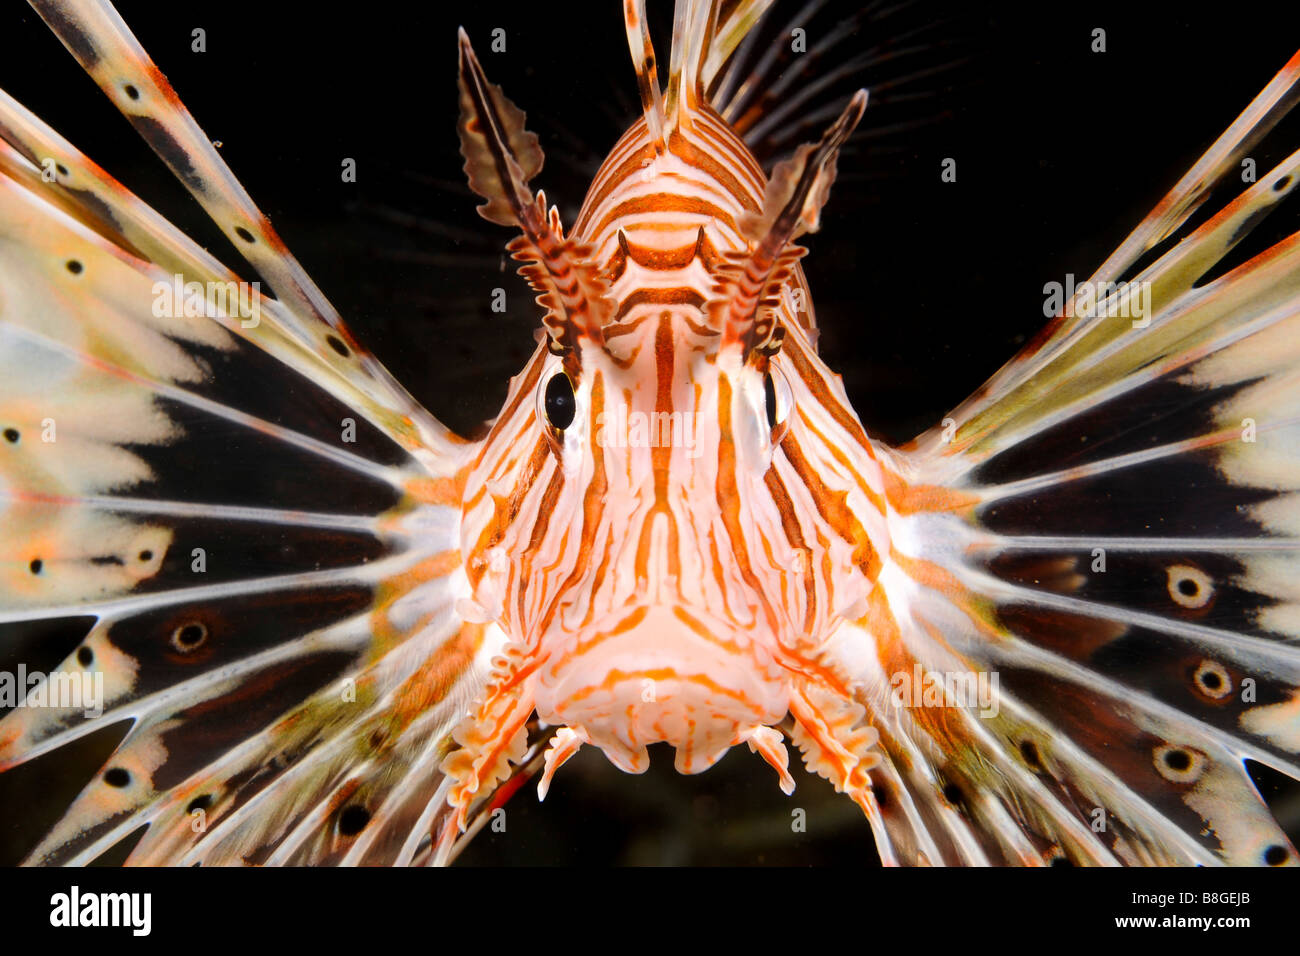 Israel Eilat Red Sea Underwater photograph of a radial Lionfish Pterois radiata close up of the head and face Stock Photo